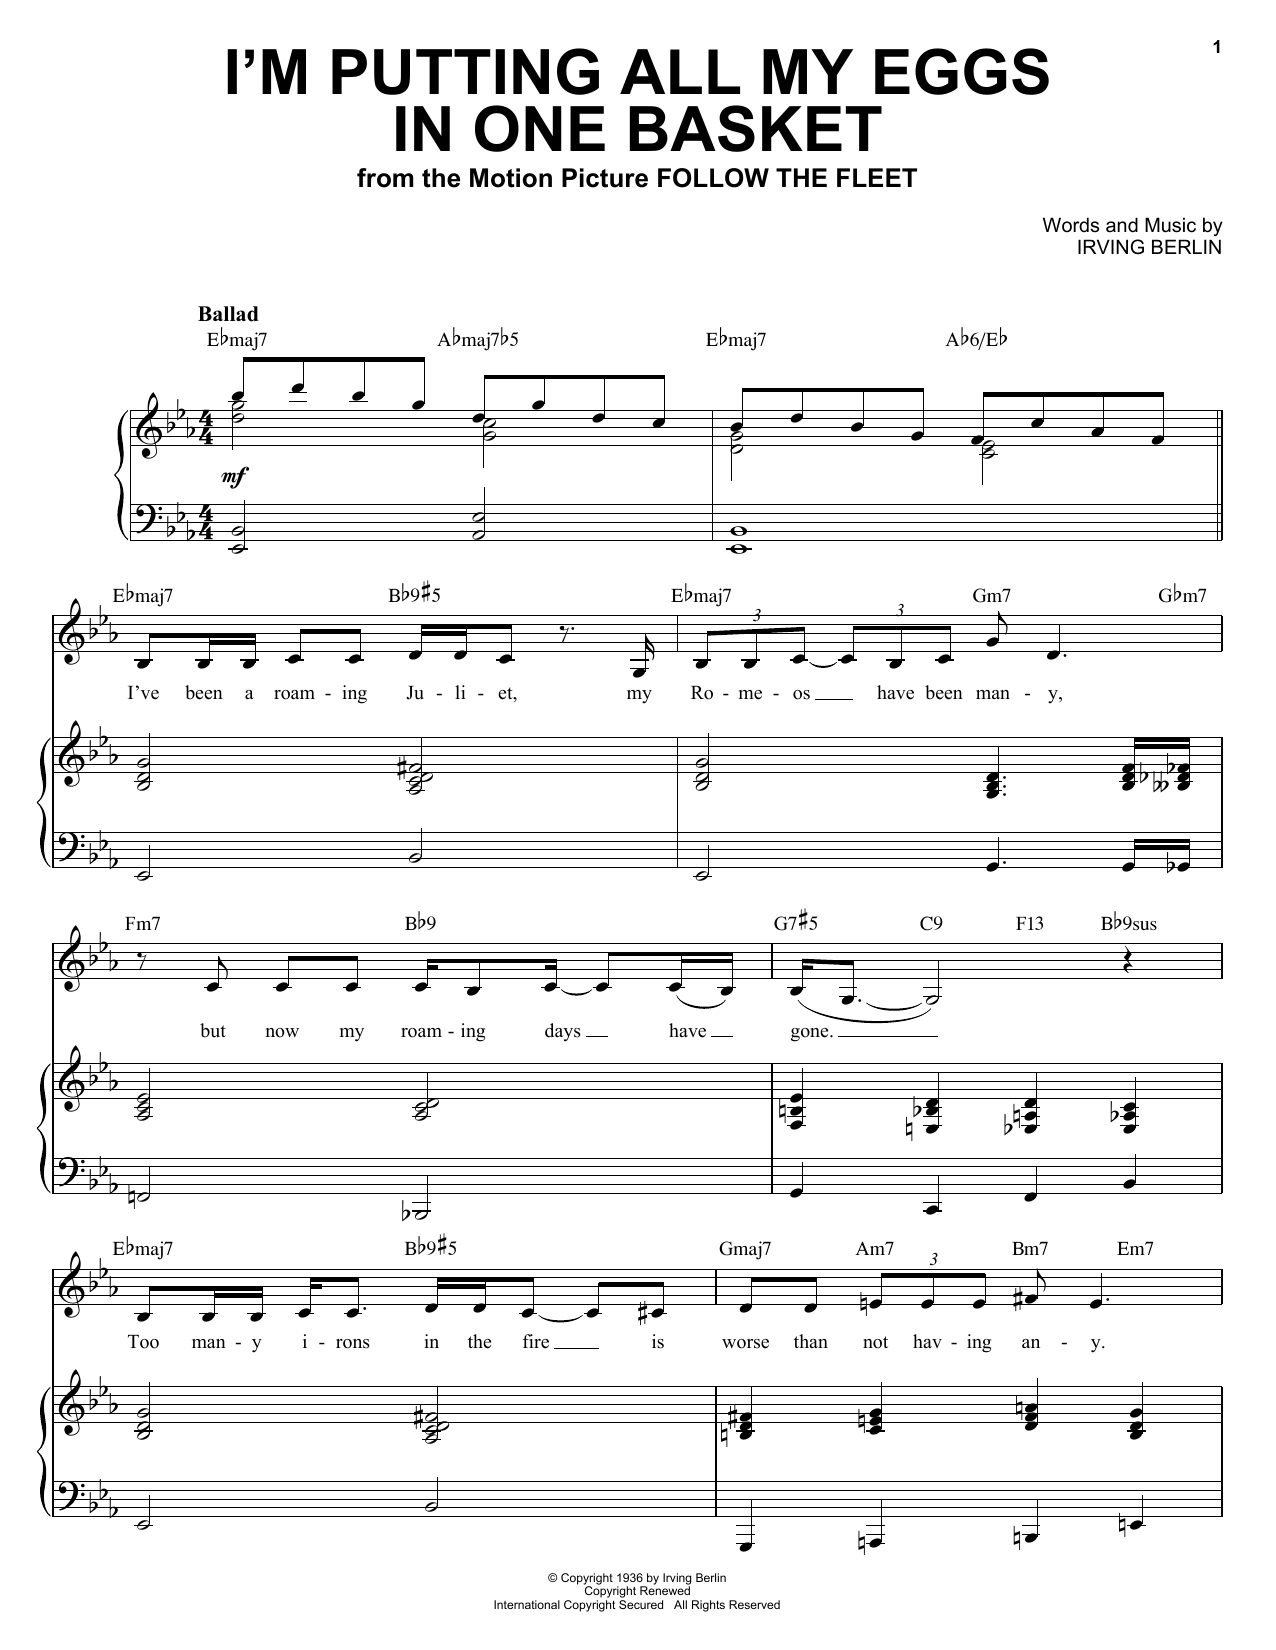 Ella Fitzgerald I'm Putting All My Eggs In One Basket sheet music notes and chords. Download Printable PDF.